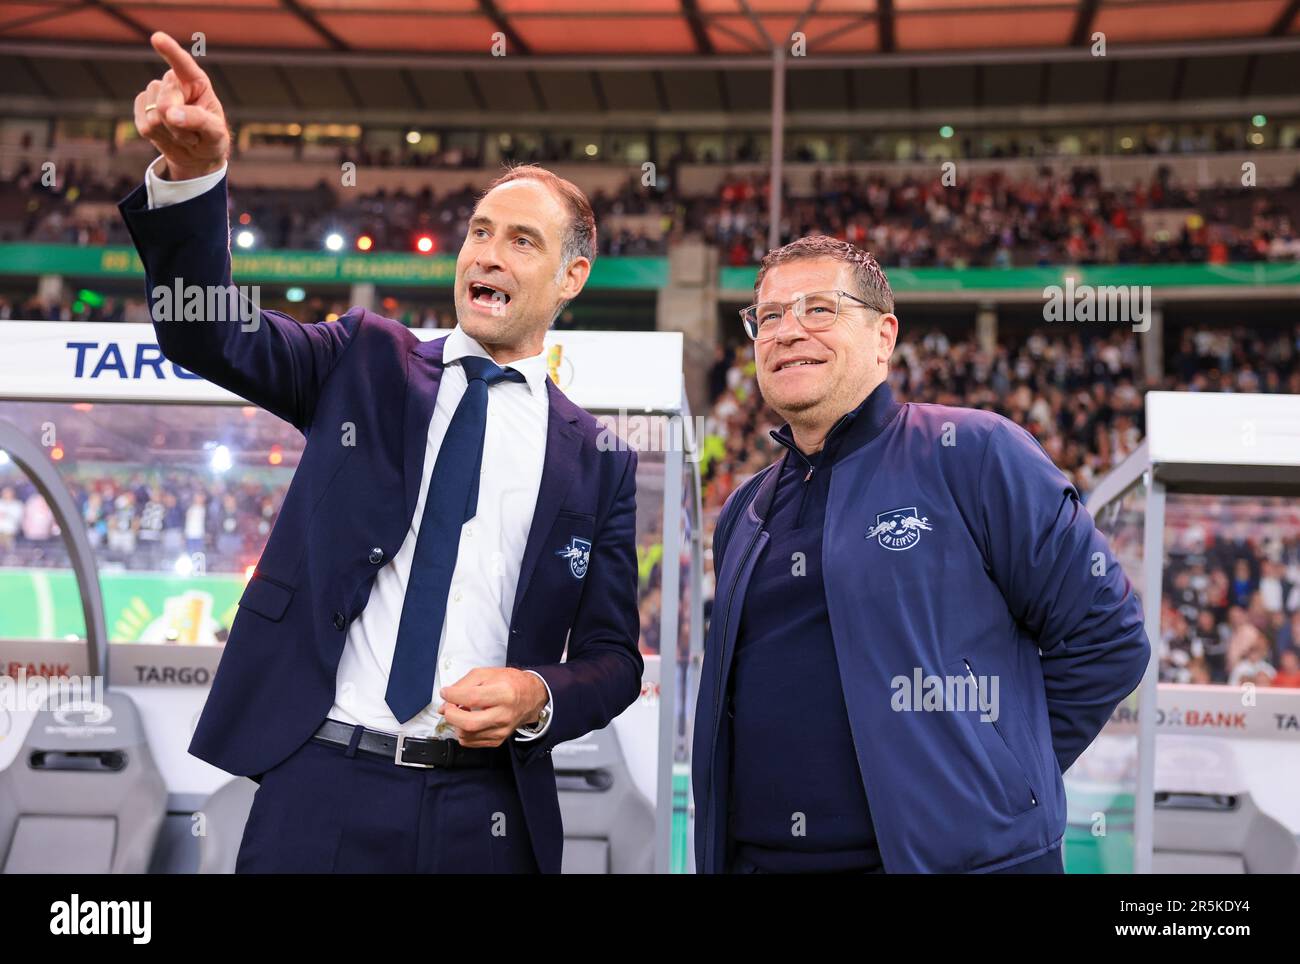 Berlin, Germany. 03rd June, 2023. Soccer: DFB Cup, final, RB Leipzig - Eintracht Frankfurt at the Olympiastadion. Leipzig's Oliver Mintzlaff (l), Managing Director Red Bull, and Max Eberl, Managing Director Sport, talk after the match. Credit: Jan Woitas/dpa - IMPORTANT NOTE: In accordance with the requirements of the DFL Deutsche Fußball Liga and the DFB Deutscher Fußball-Bund, it is prohibited to use or have used photographs taken in the stadium and/or of the match in the form of sequence pictures and/or video-like photo series./dpa/Alamy Live News Stock Photo